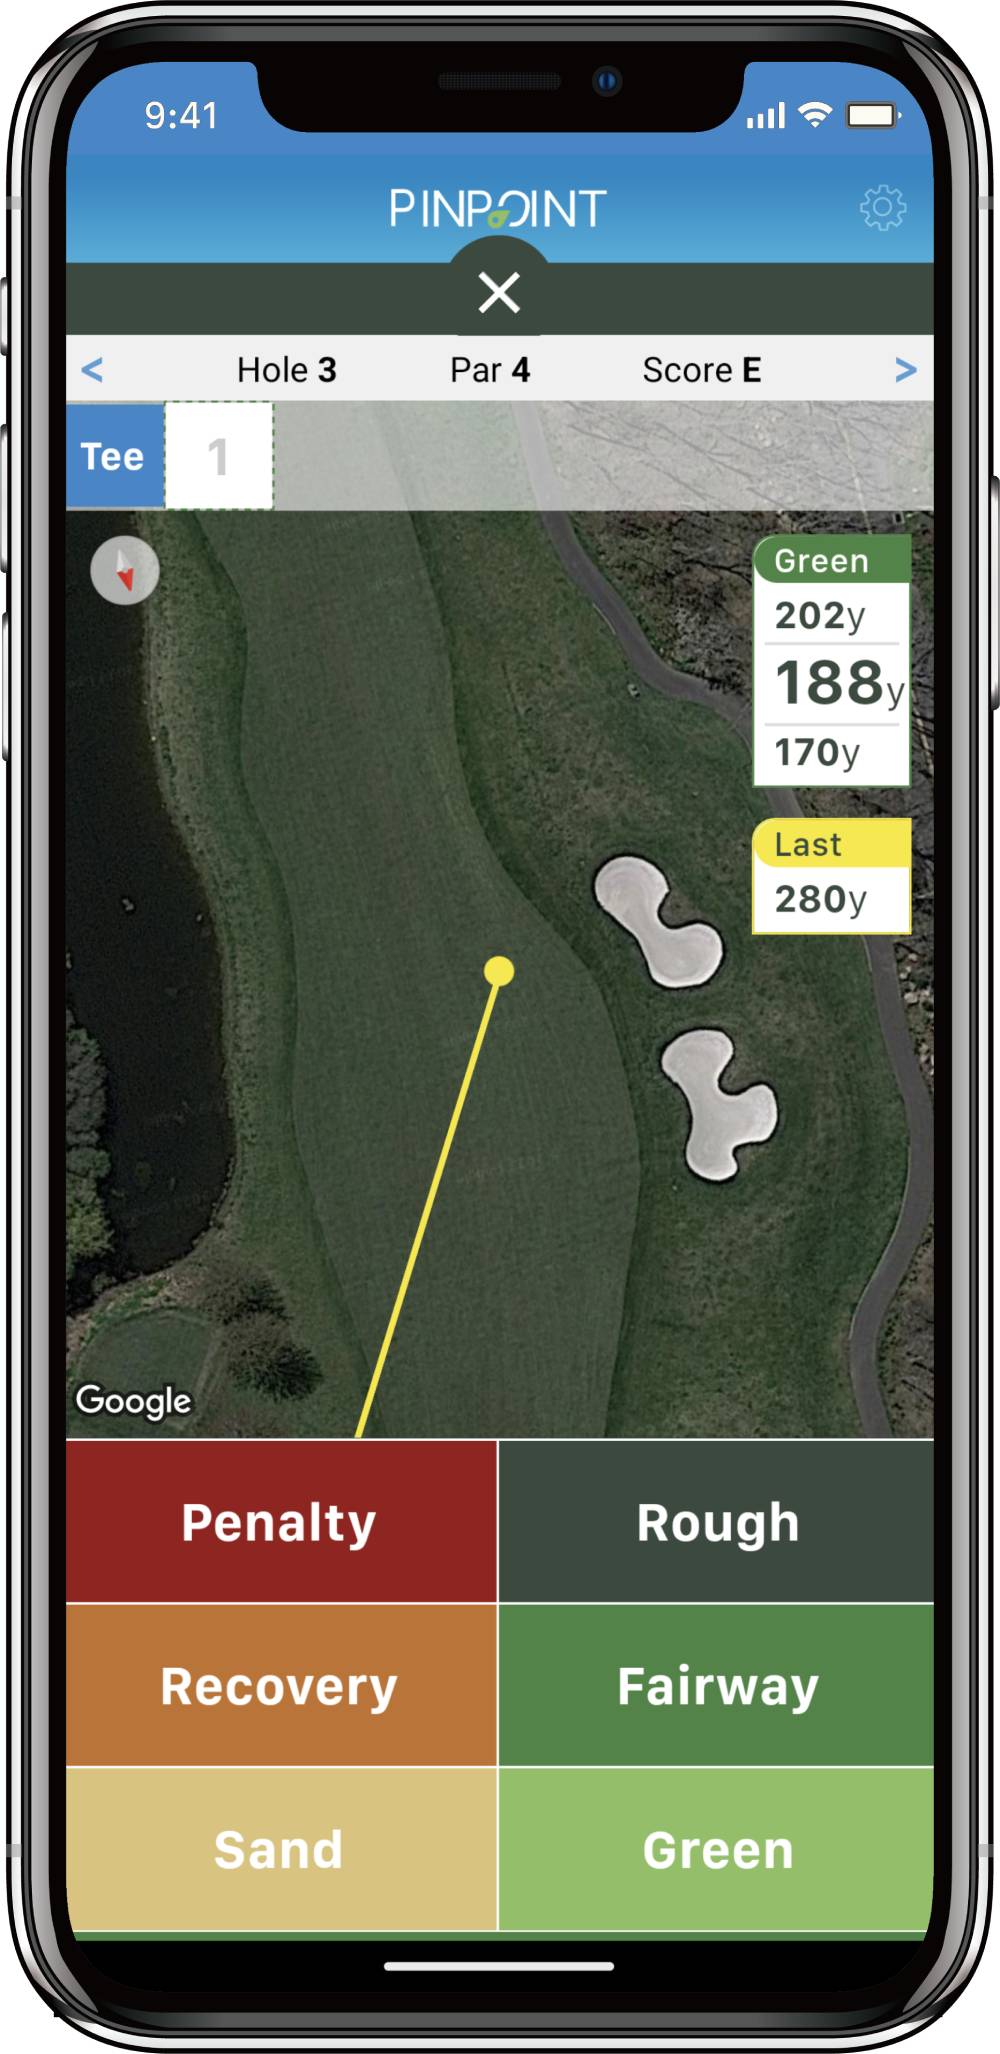 GPS distance planning with Pinpoint Golf App